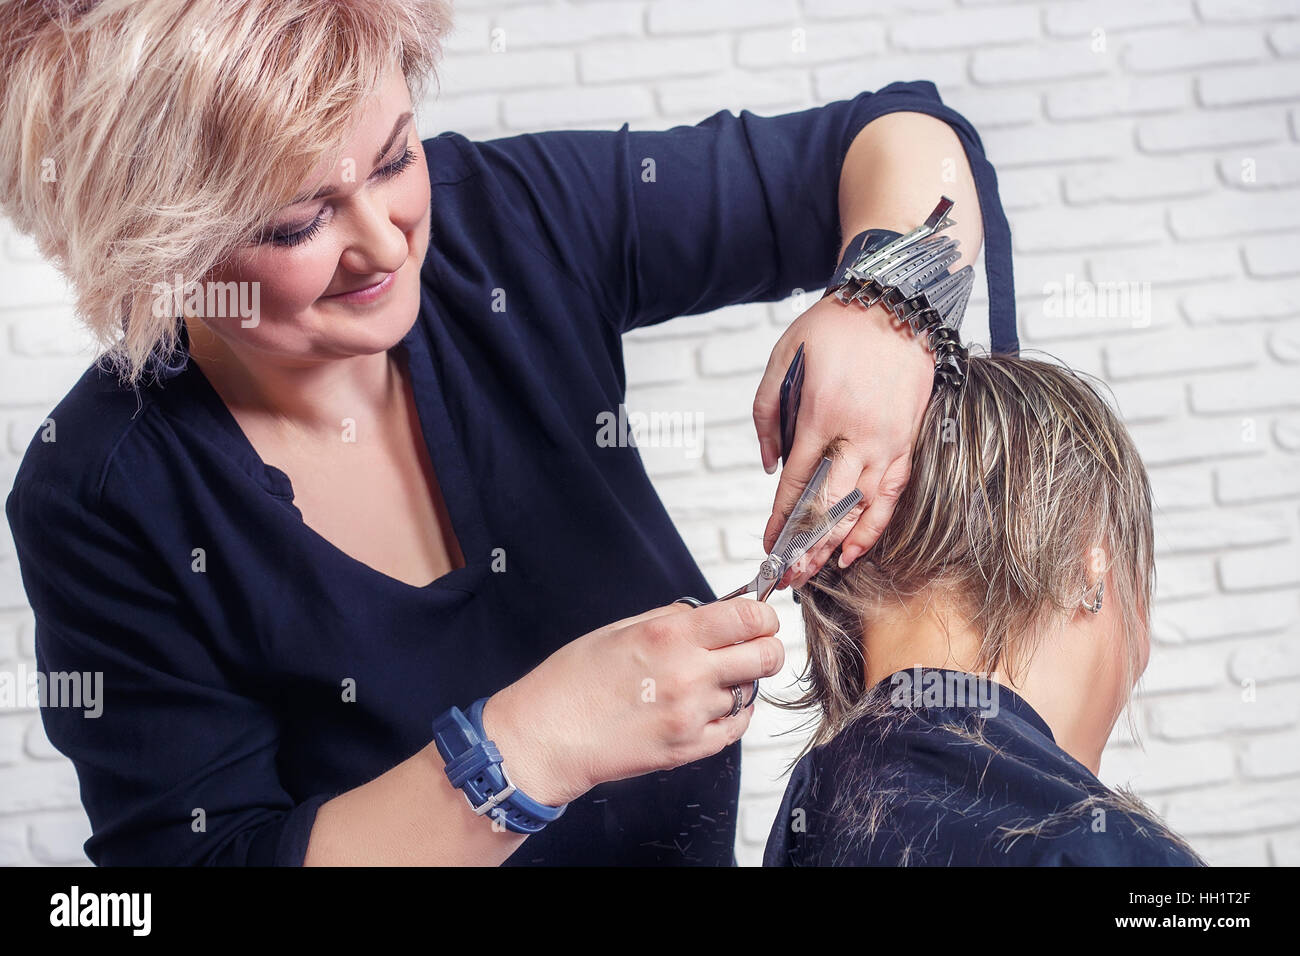 Hairdresser cutting hair with scissors Stock Photo